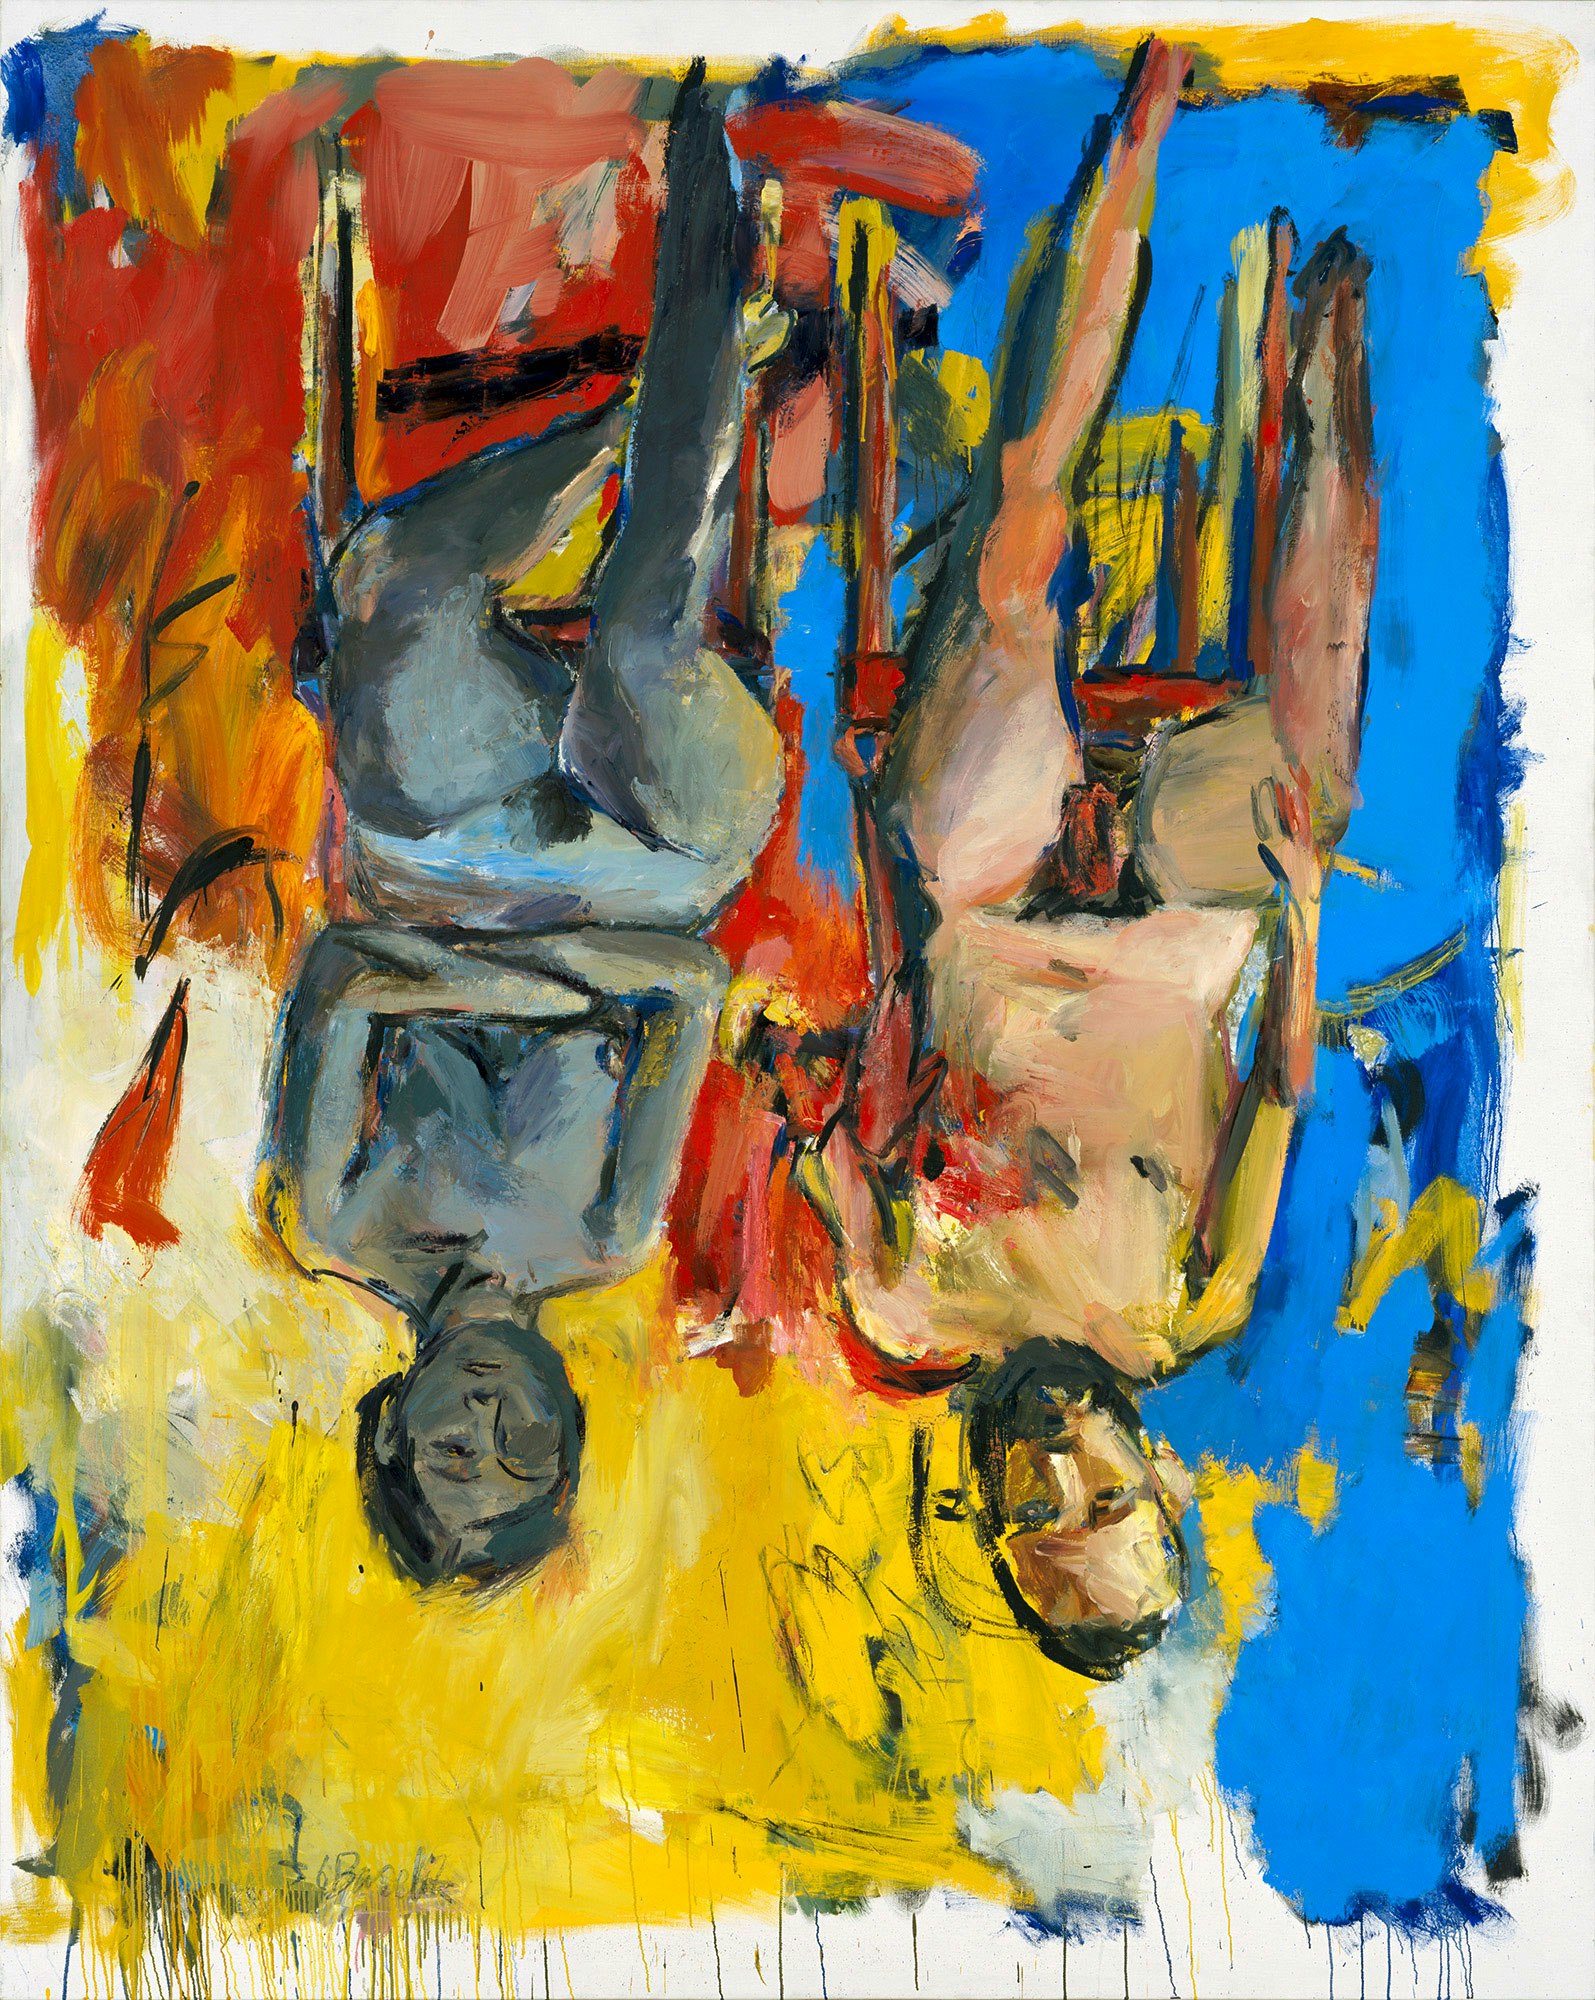 Georg Baselitz, <em>Schlafzimmer (Bedroom)</em>, 1975. Oil and charcoal on canvas, 98 1/2 x 78 3/4 inches. Georg Baselitz Treuhandstiftung.